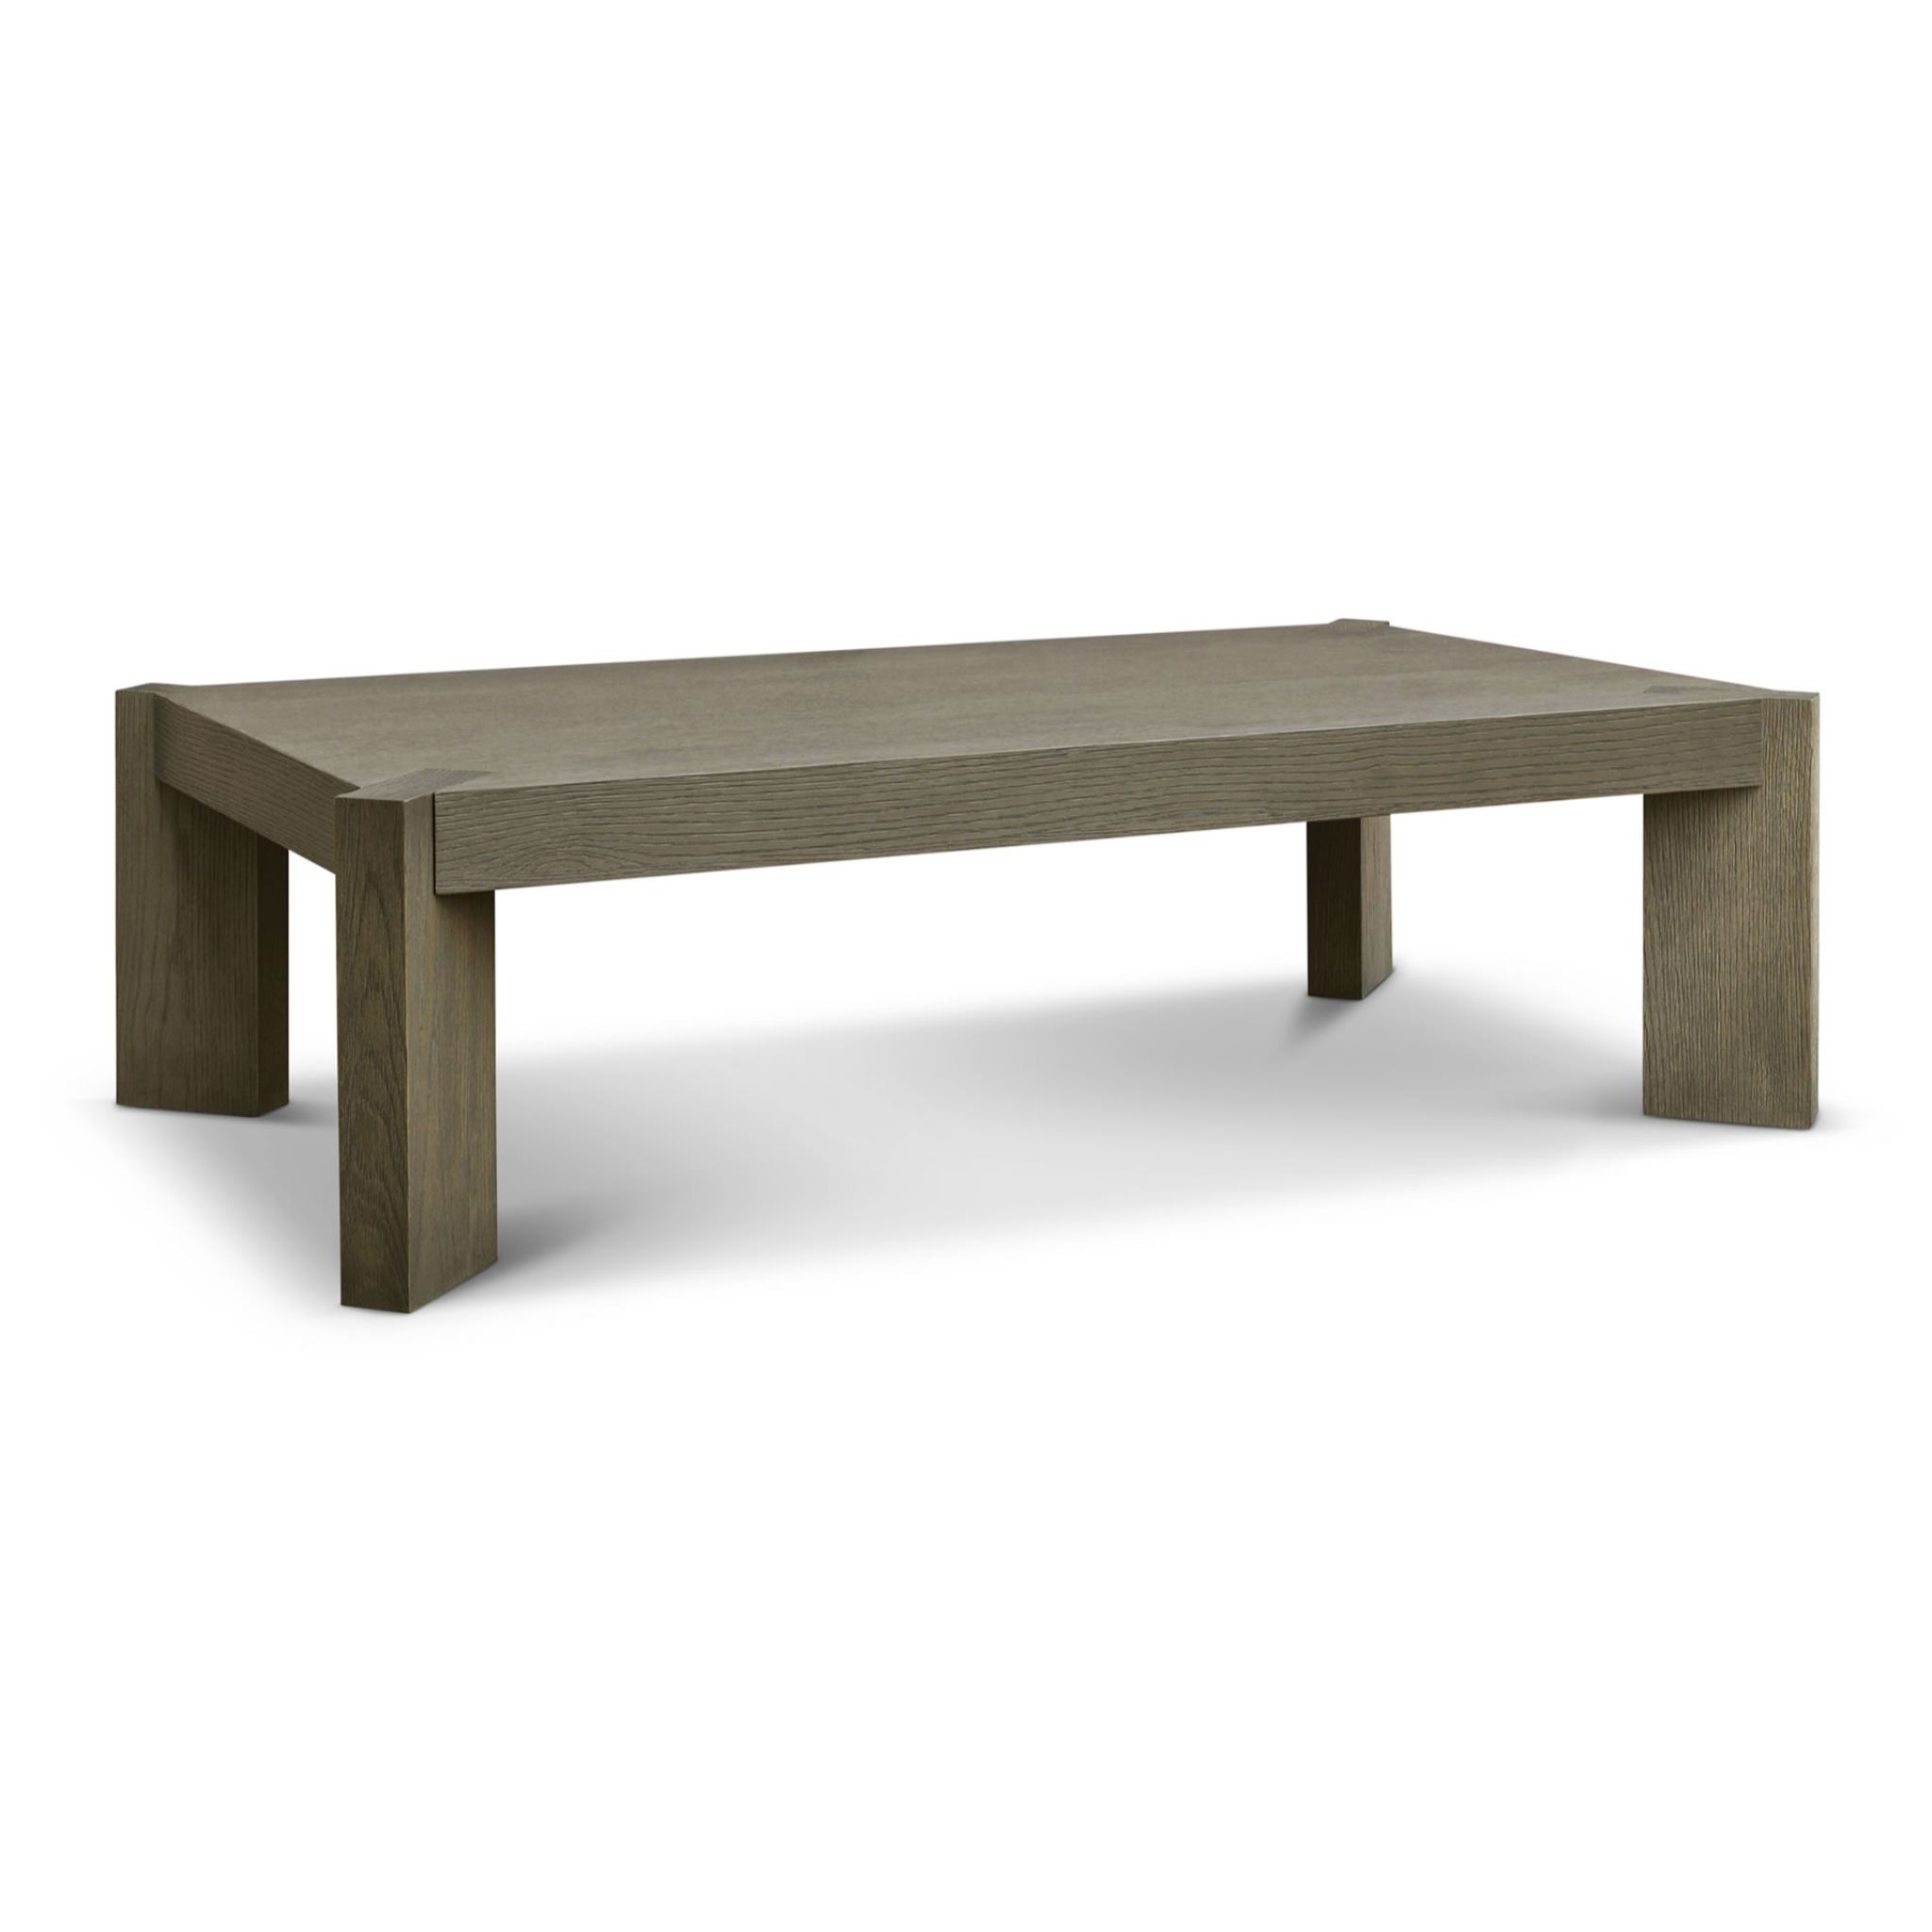 Berkeley Designs Lucca Coffee Table 140 x 80 x 45cm – Furniture & Homeware – The Luxe Home